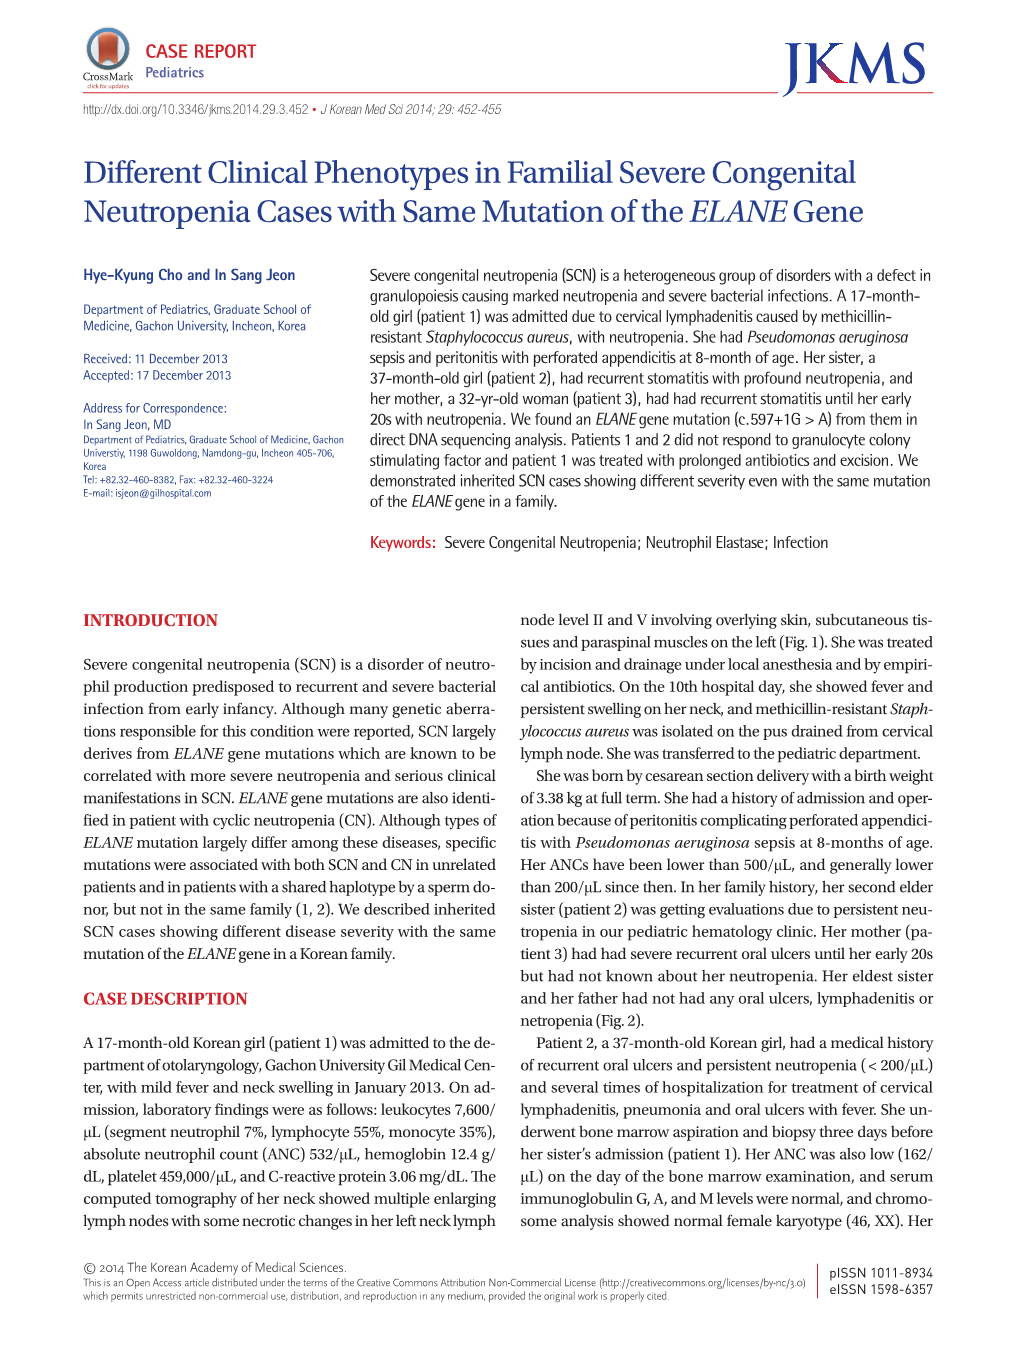 Different Clinical Phenotypes in Familial Severe Congenital Neutropenia Cases with Same Mutation of the ELANE Gene